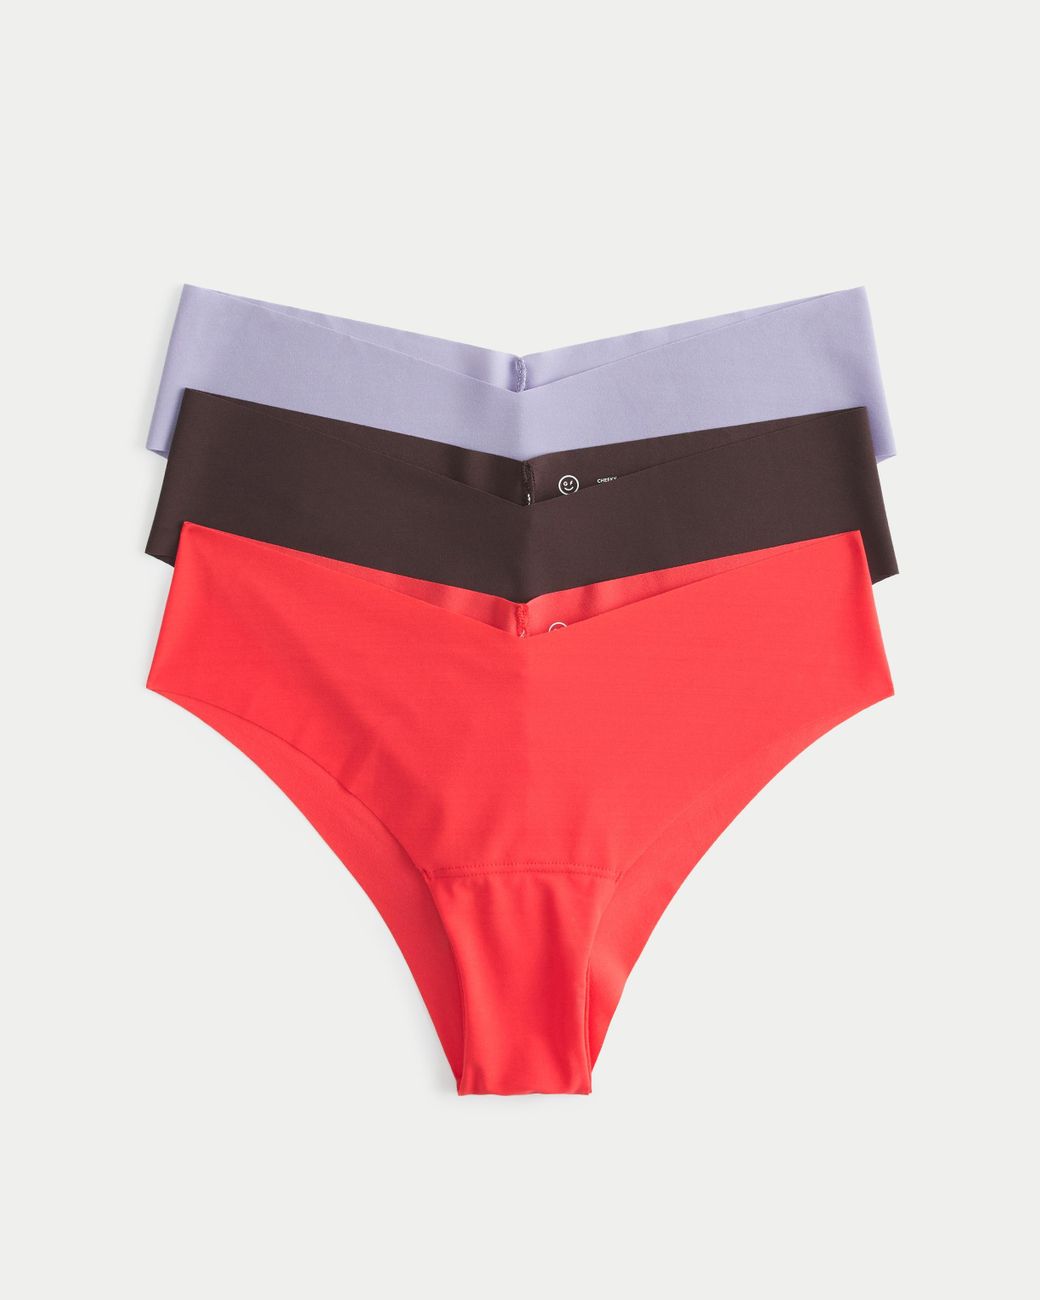 Hollister Gilly Hicks No-show Cheeky Underwear 3-pack in Red